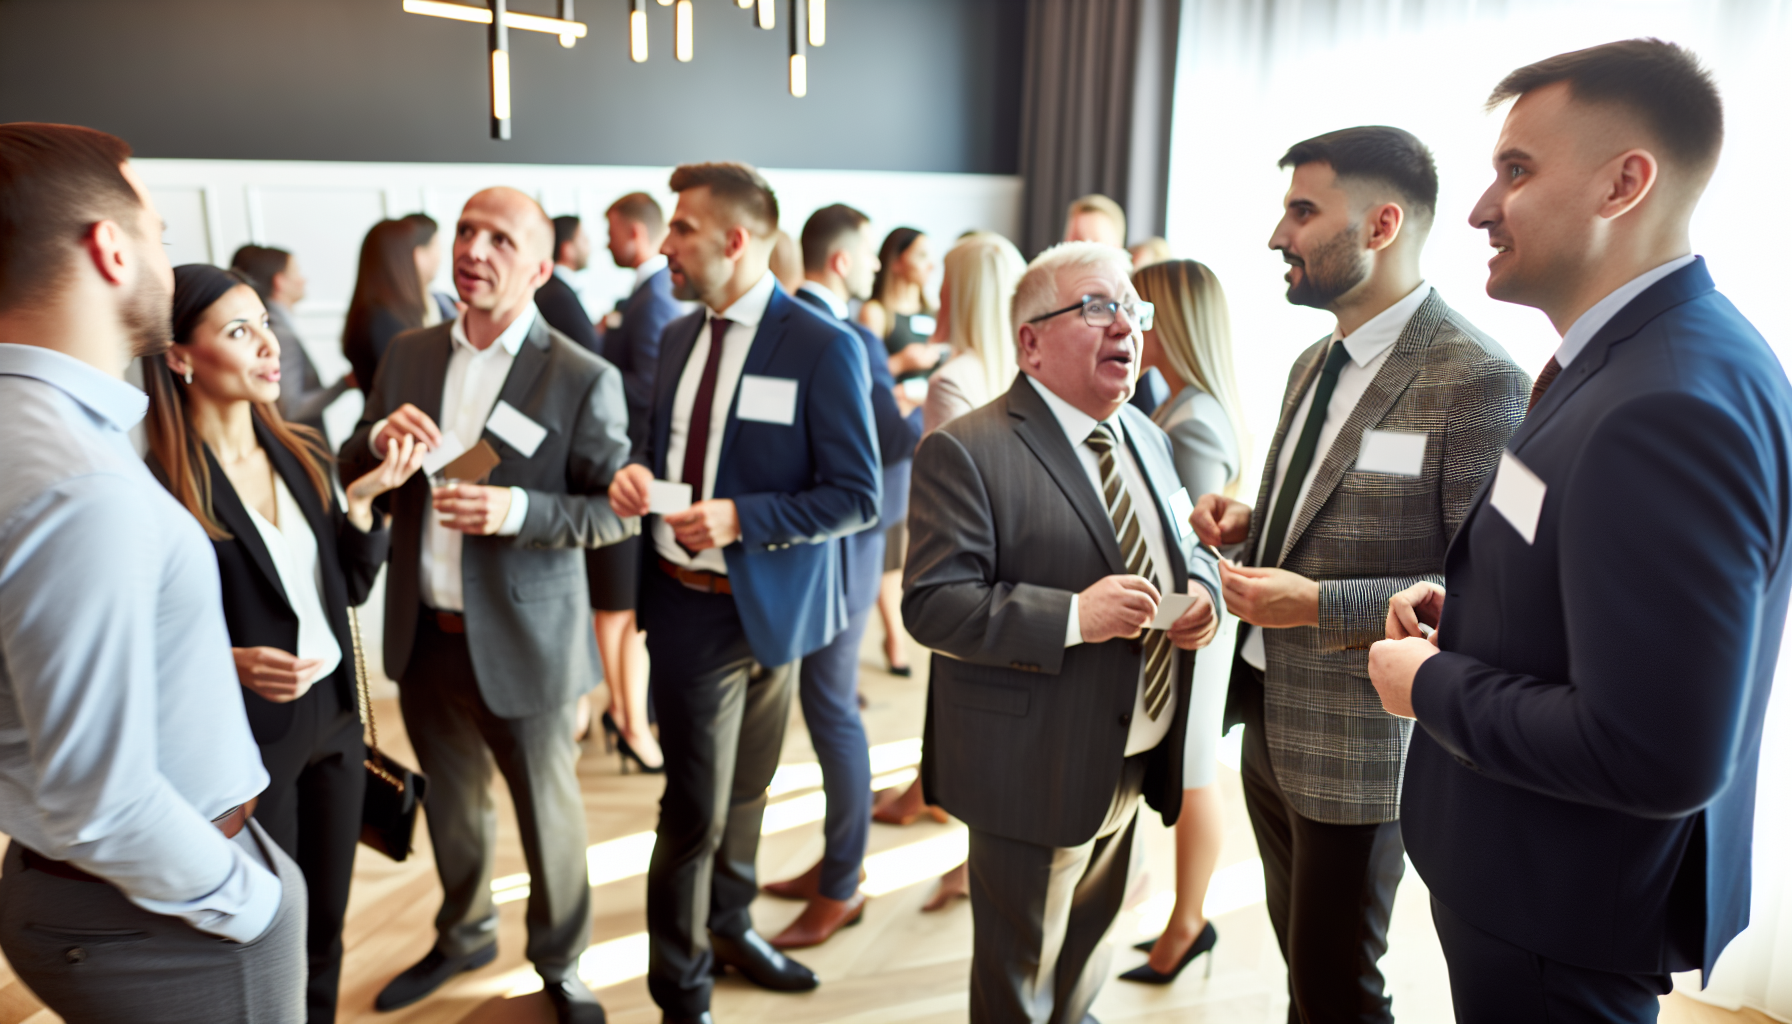 Professional networking event